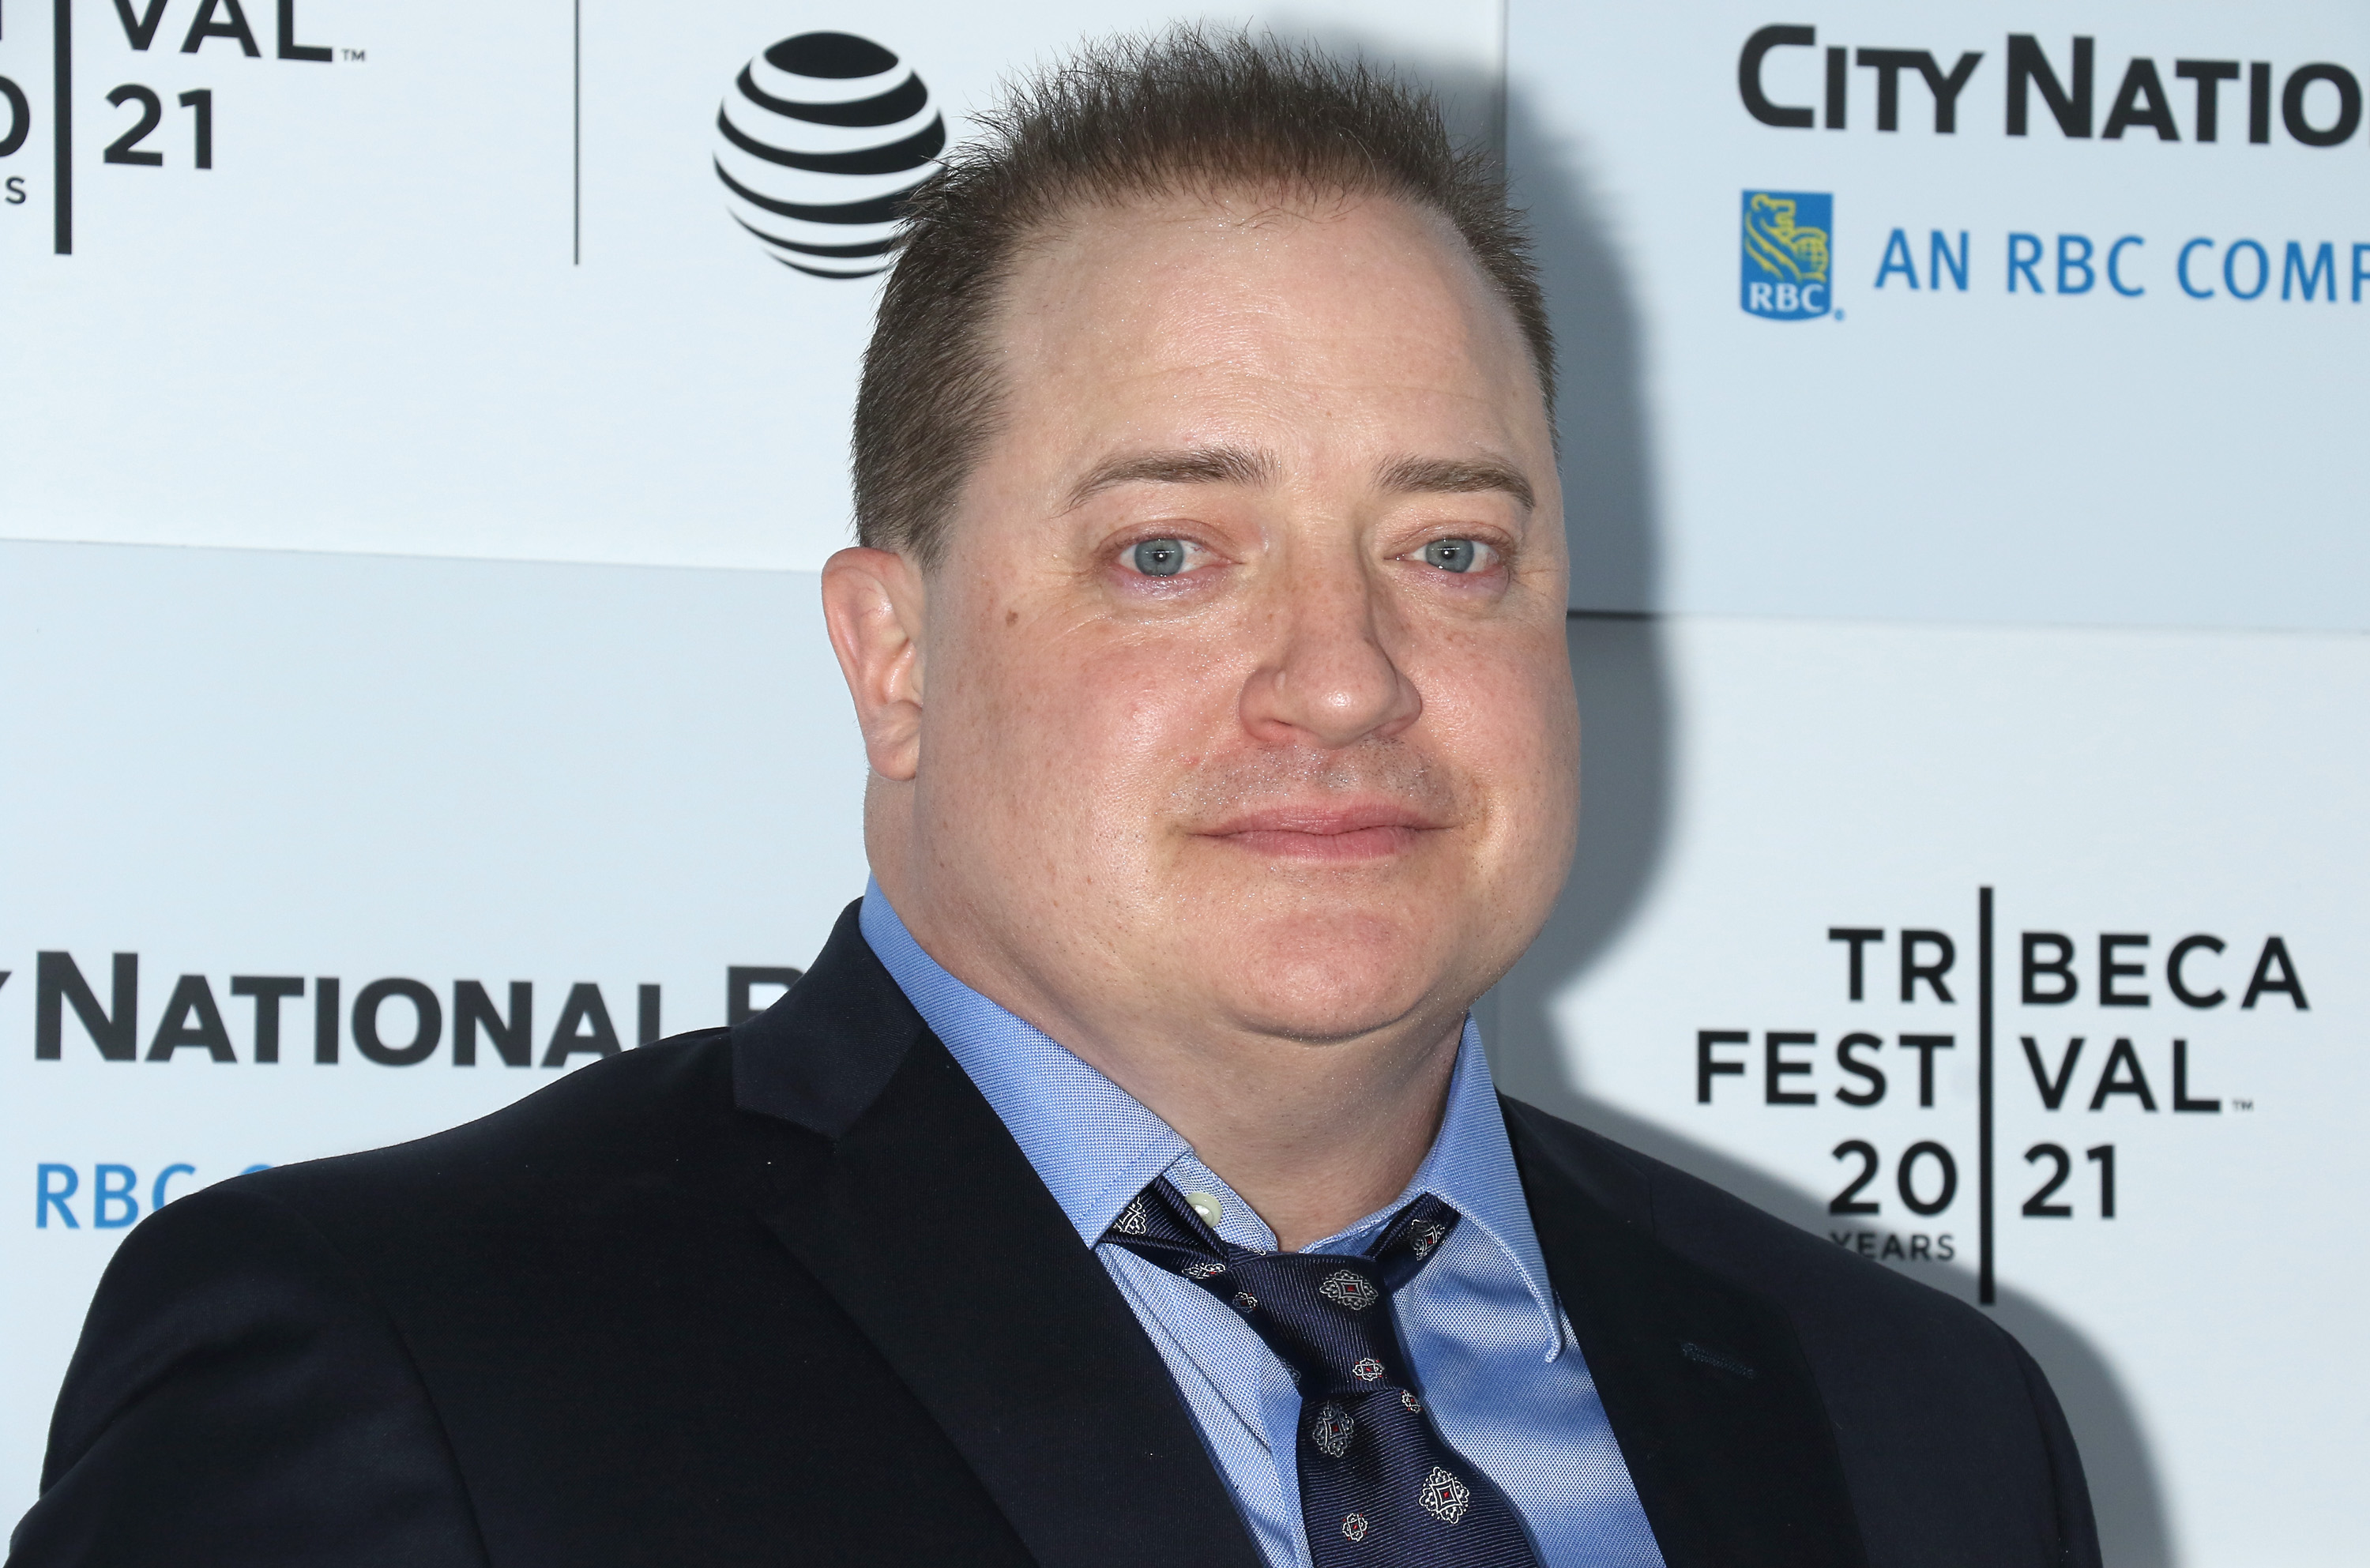 Brendan Fraser at the "No Sudden Move" premiere during the Tribeca Festival on June 18, 2021, in New York City | Source: Getty Images